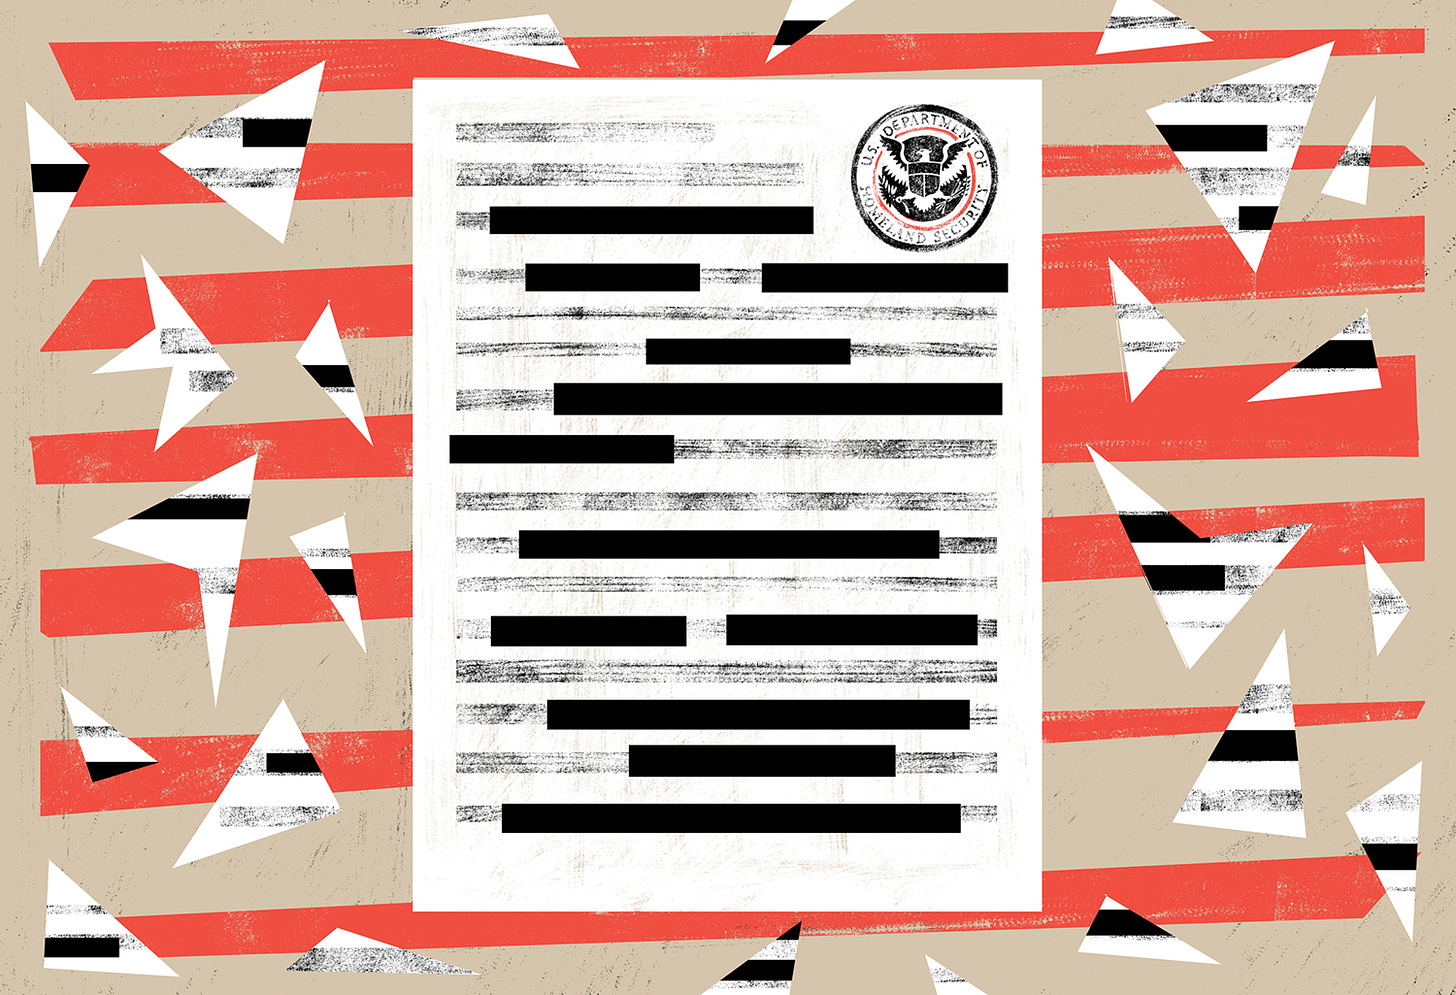 Illustration of a redacted government letter